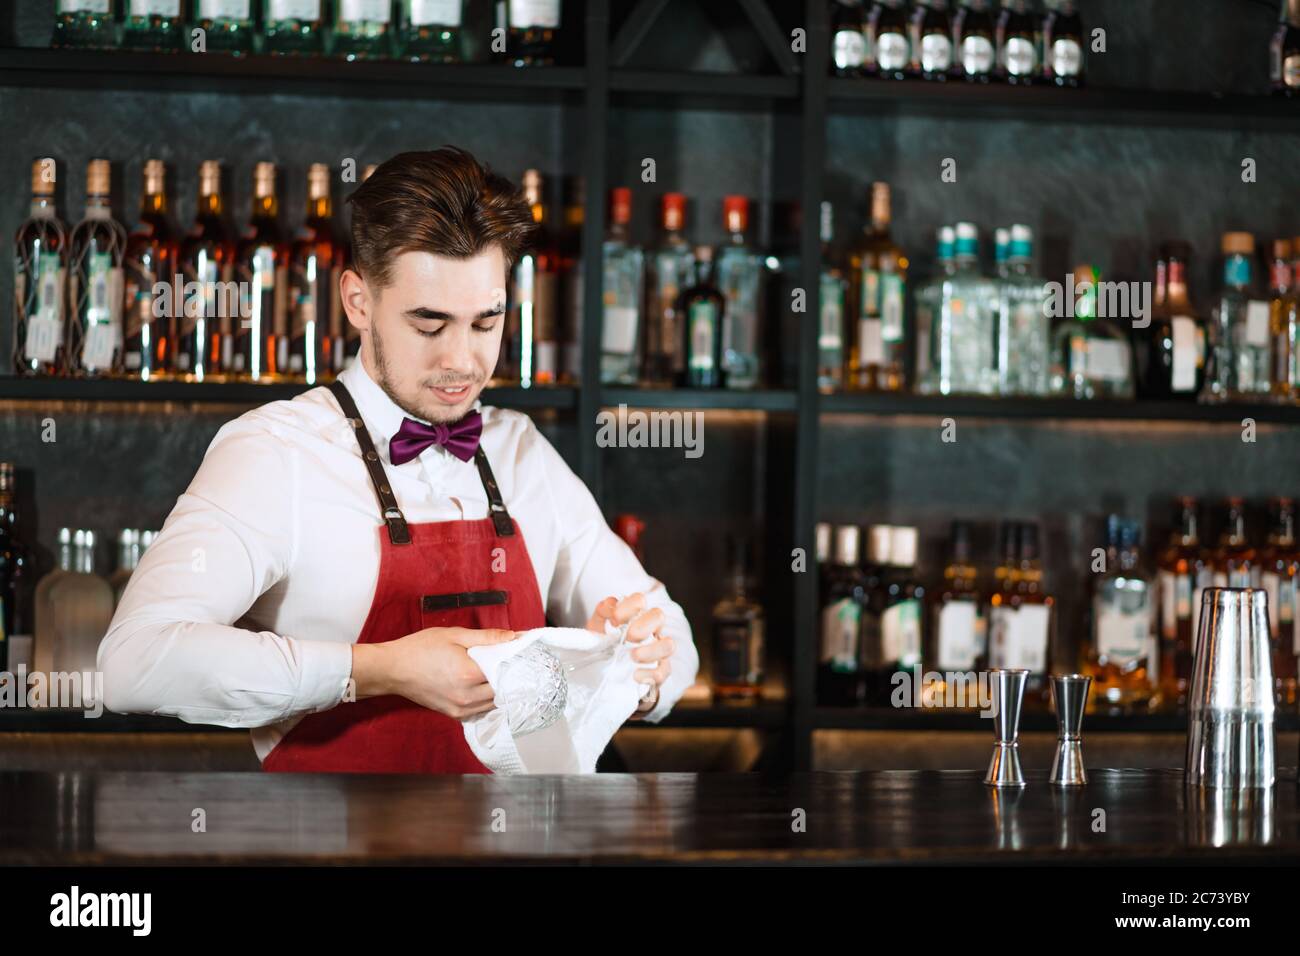 https://c8.alamy.com/comp/2C73YBY/young-handsome-smiling-barman-in-bar-interior-wiping-vine-glasses-professional-bartender-portrait-at-work-in-night-club-cleaning-stemware-while-waiti-2C73YBY.jpg